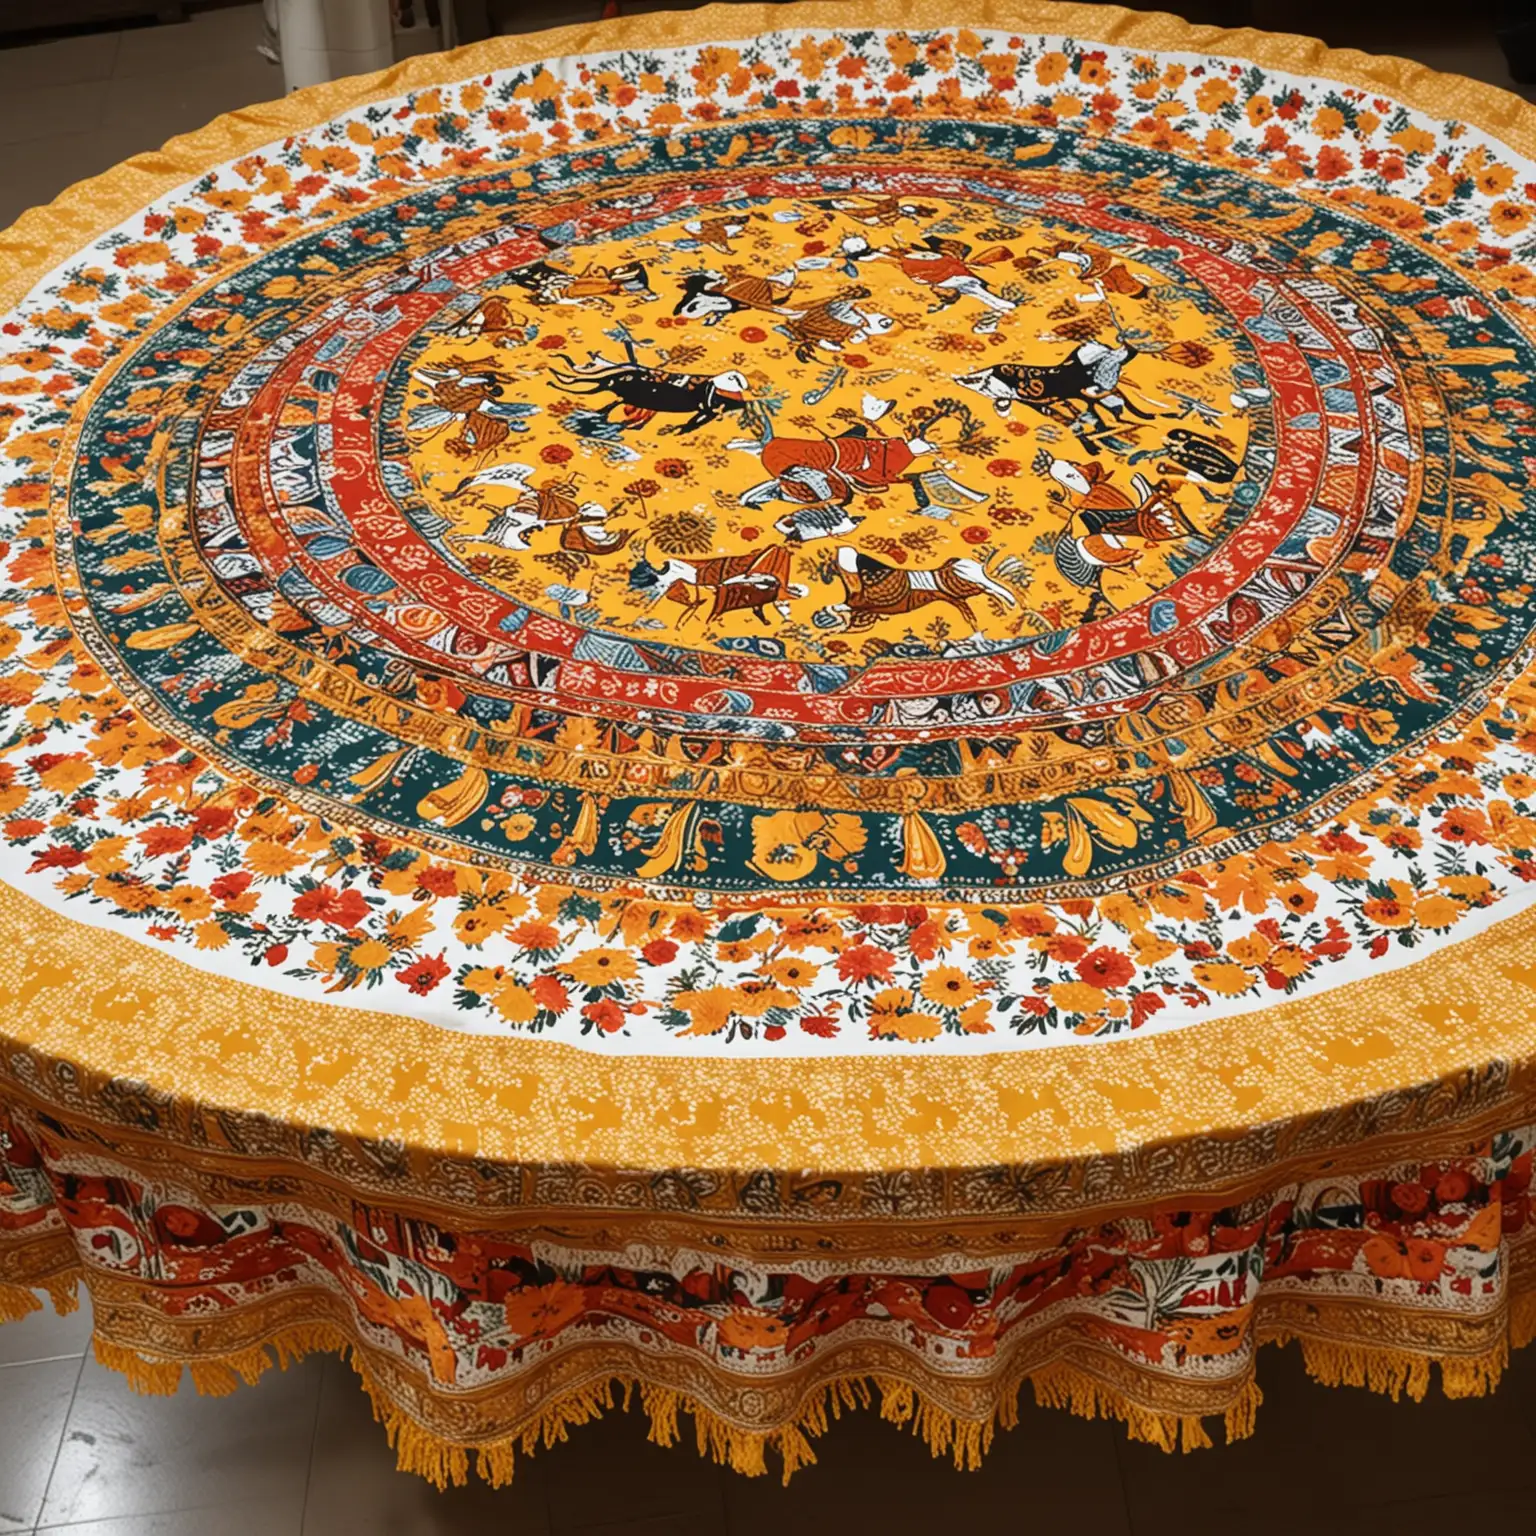 Indian Festival Table Cover with Yellow Fabric and Krishna Cow Design